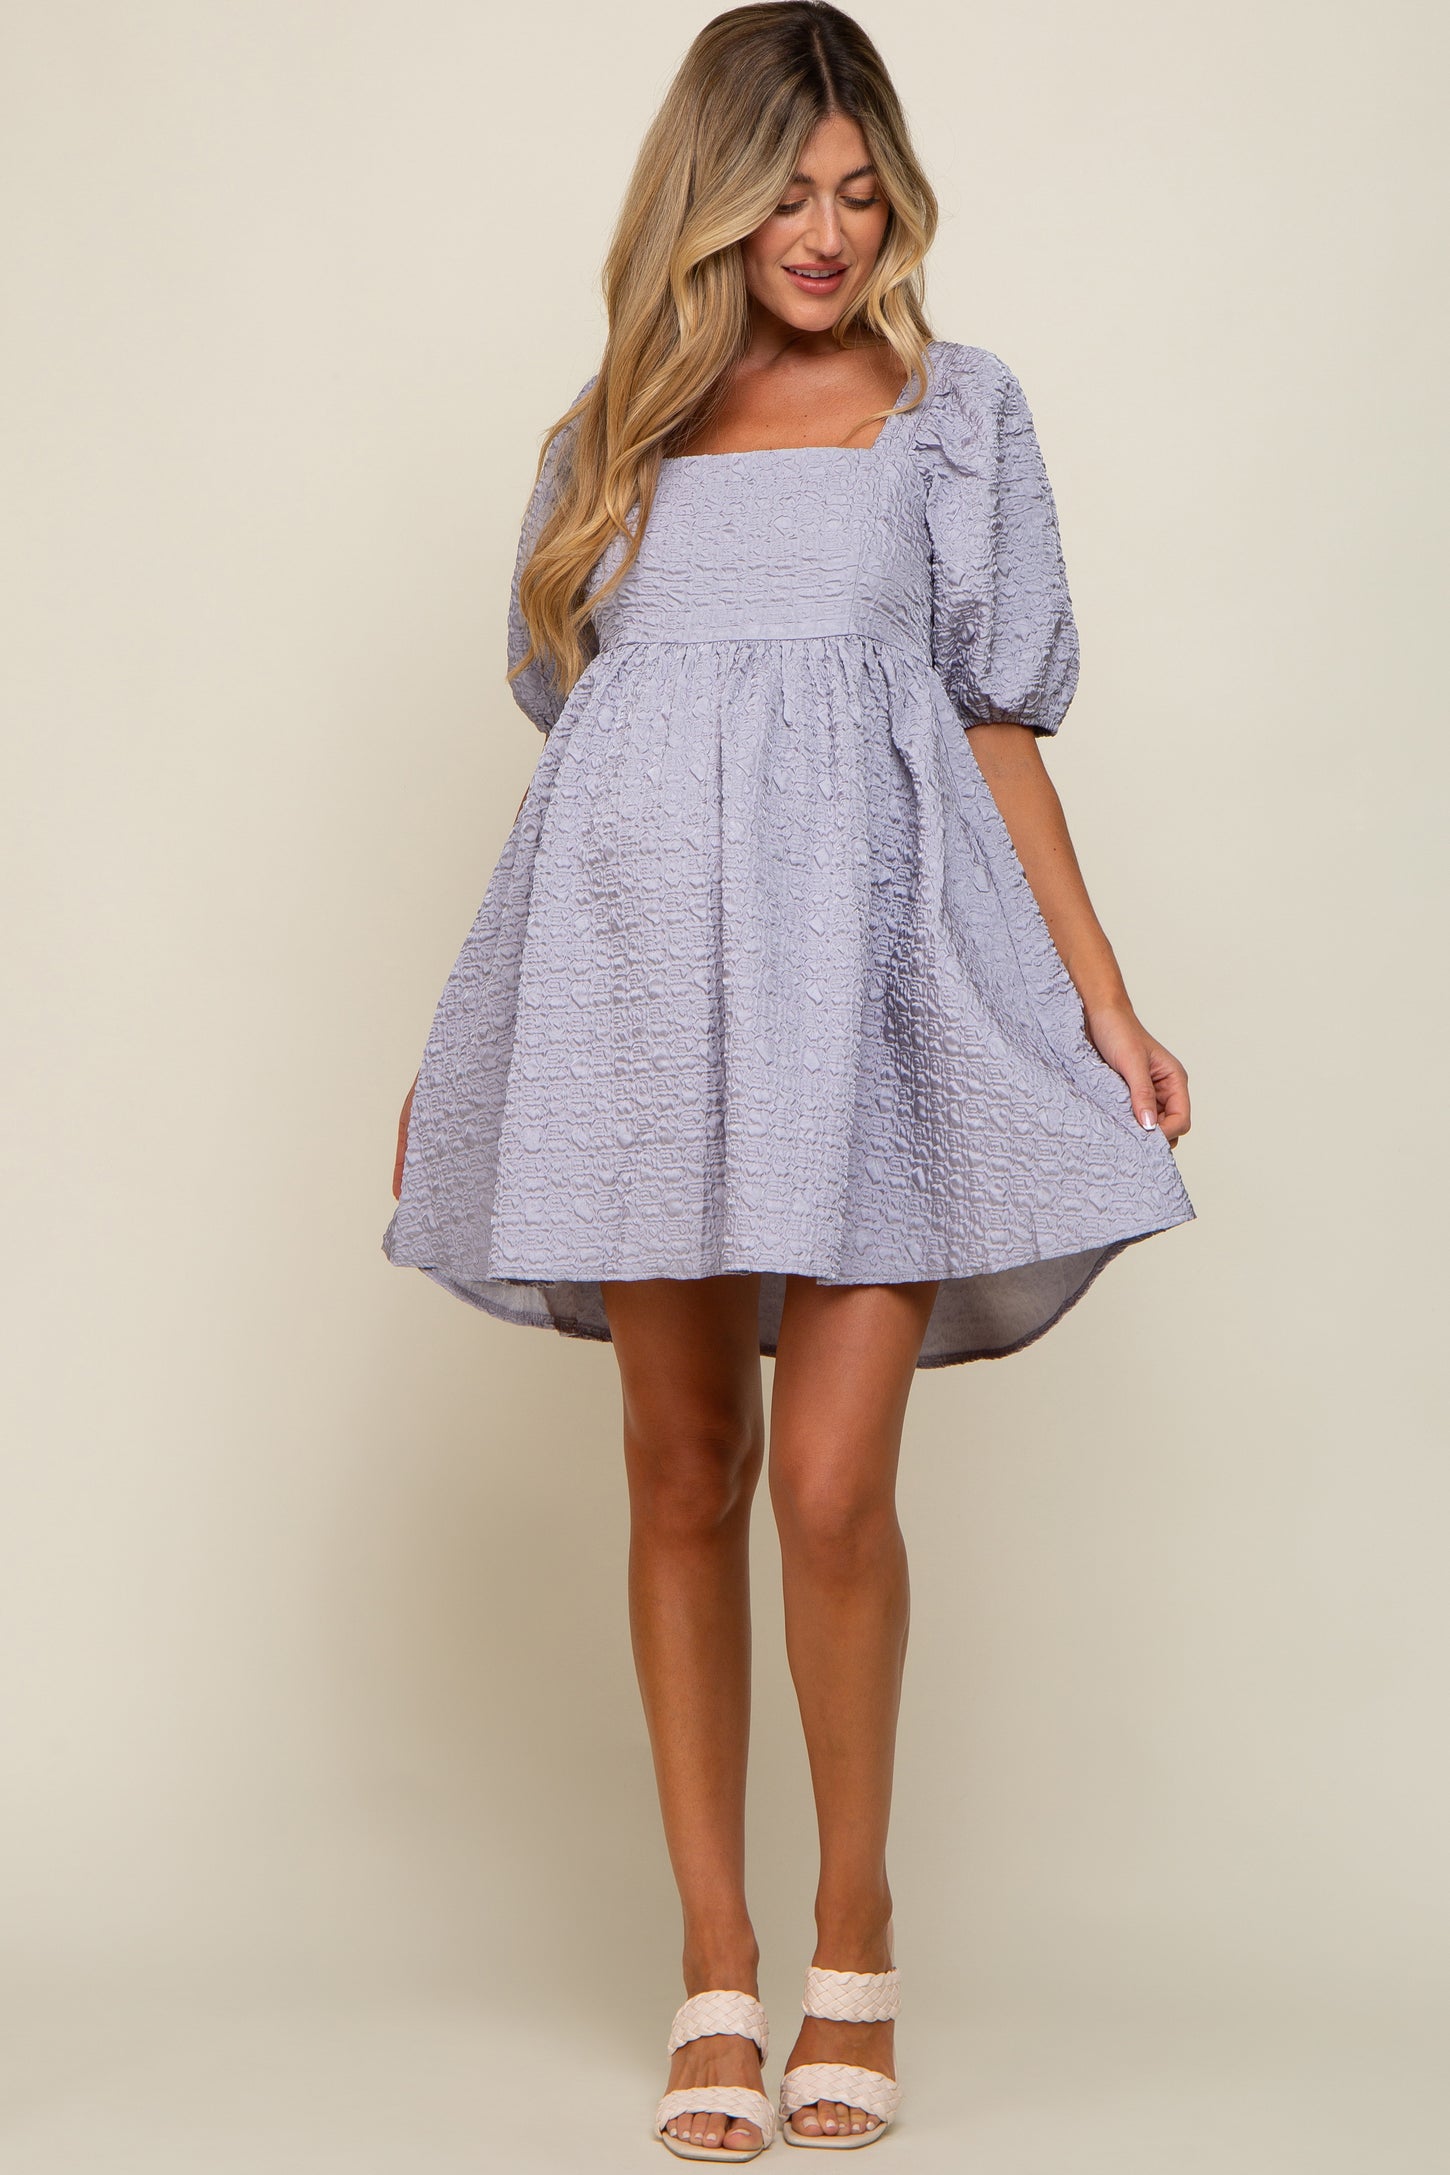 Periwinkle Textured Pleated Maternity Dress